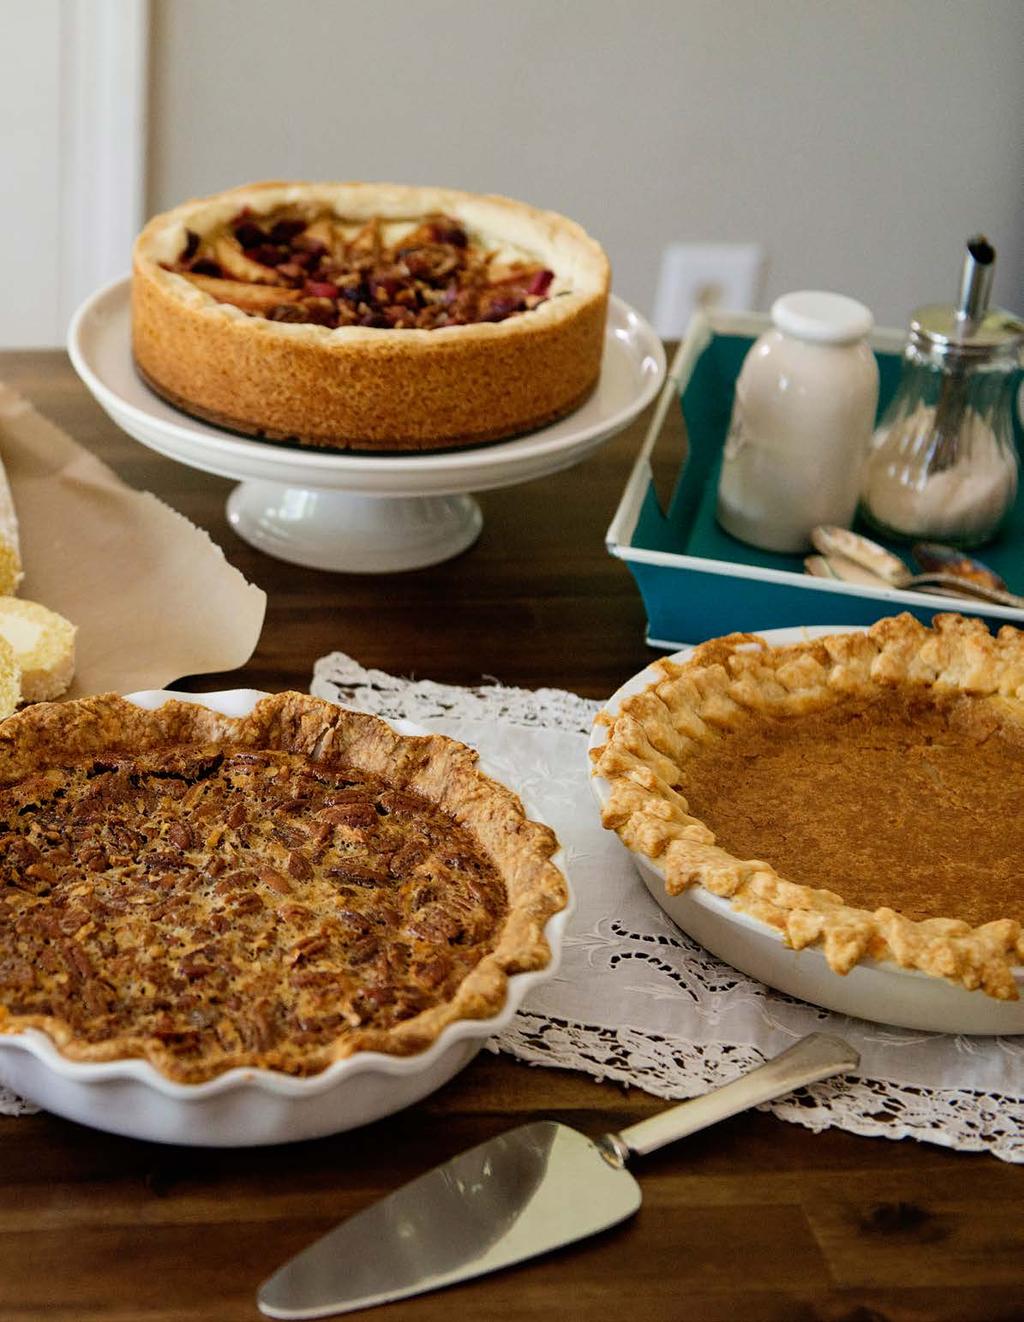 Dessert is a just as important to Thanksgiving as the turkey.